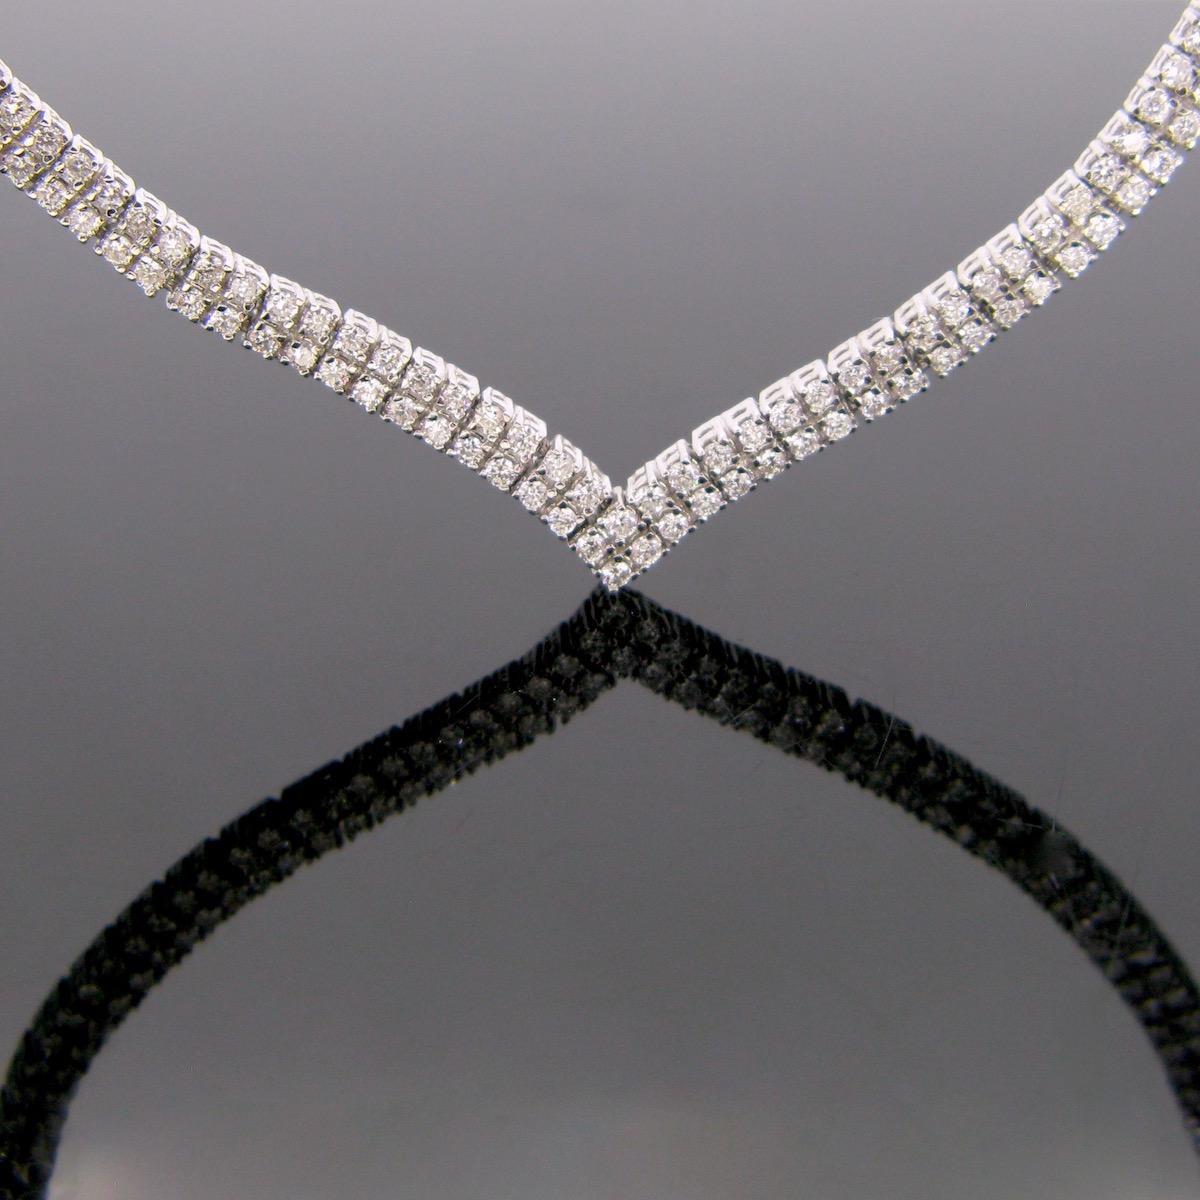 Weight : 48,20gr

Dimensions : 40 cm long X 4,8 mm large

Stones : 100 Diamonds
-Cut: Brilliant
-Totat Carat weight: 3ct approximately
-Colour: G/H 
-Clarity: VS

Metal : 18kt white gold

Condition :Very good

Hallmarks : UK

An elegant Riviere